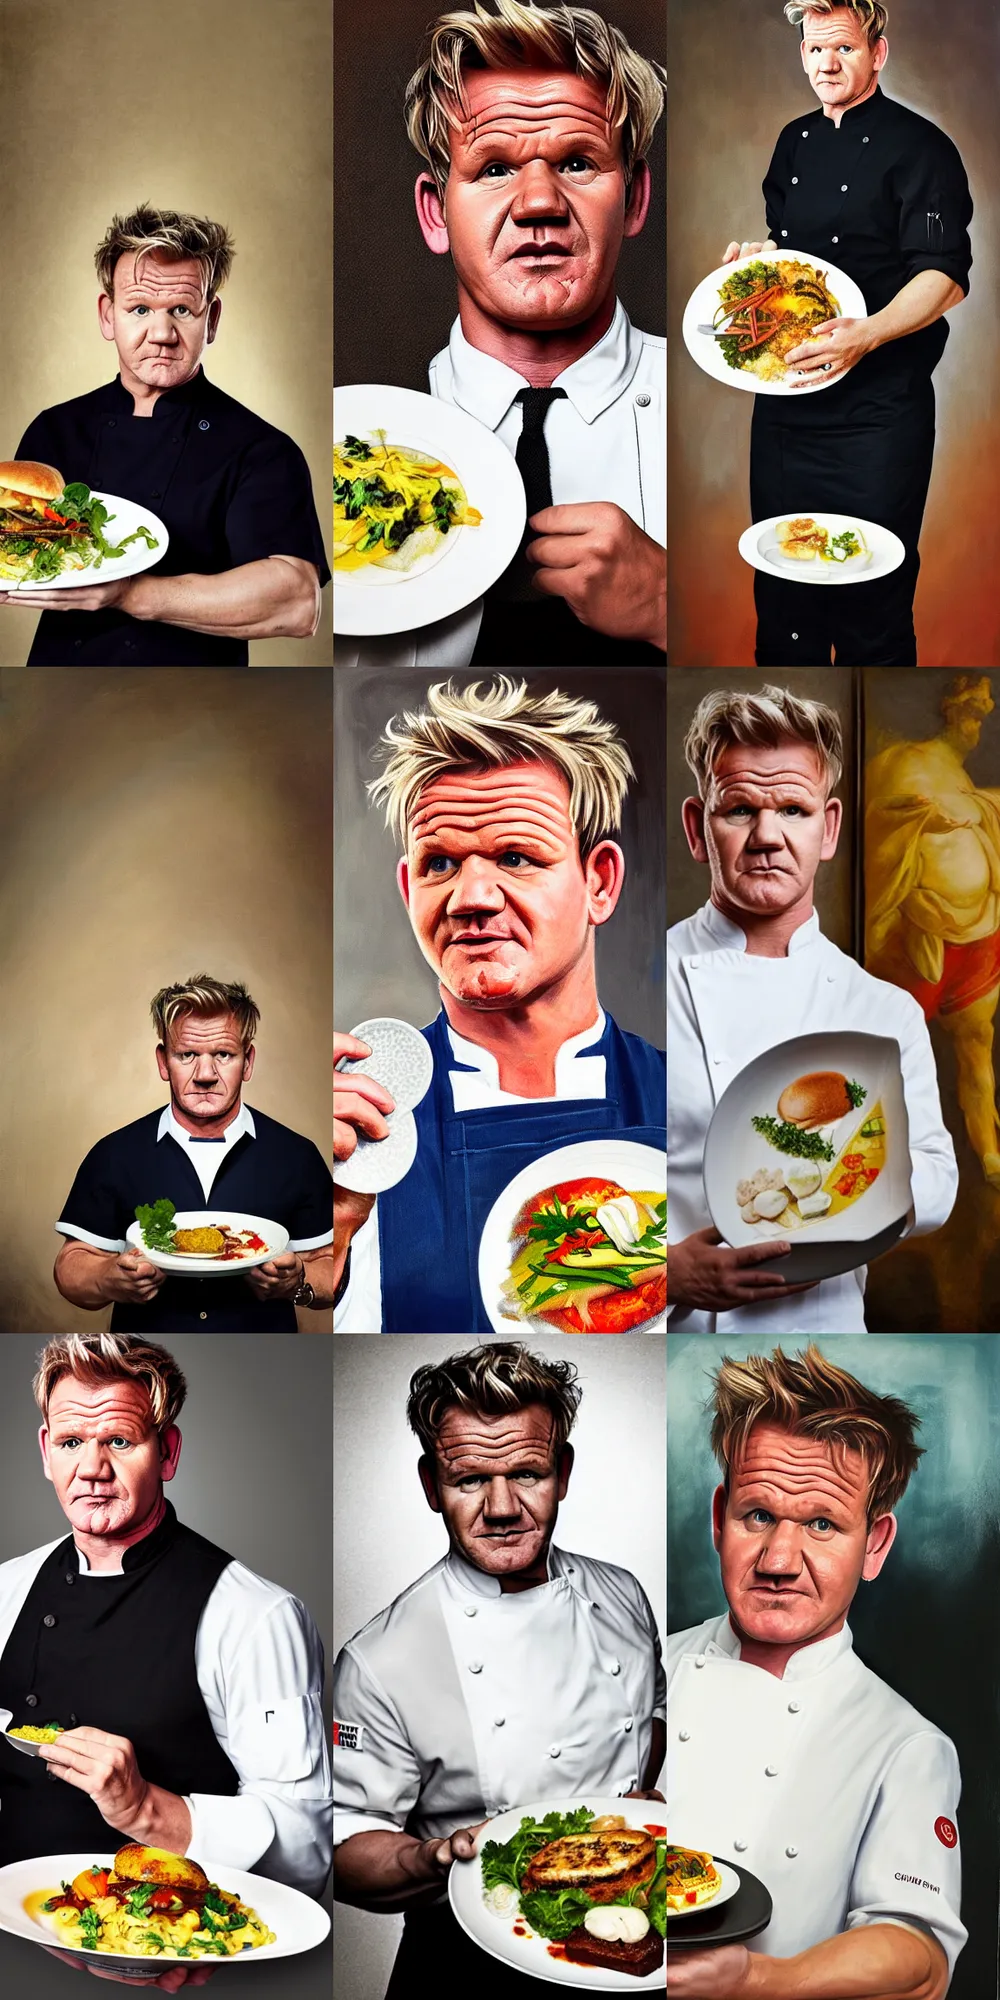 Prompt: A medium shot portrait of Gordon Ramsay wearing a chef uniform holding a plate of food, oil on canvas, classicism style